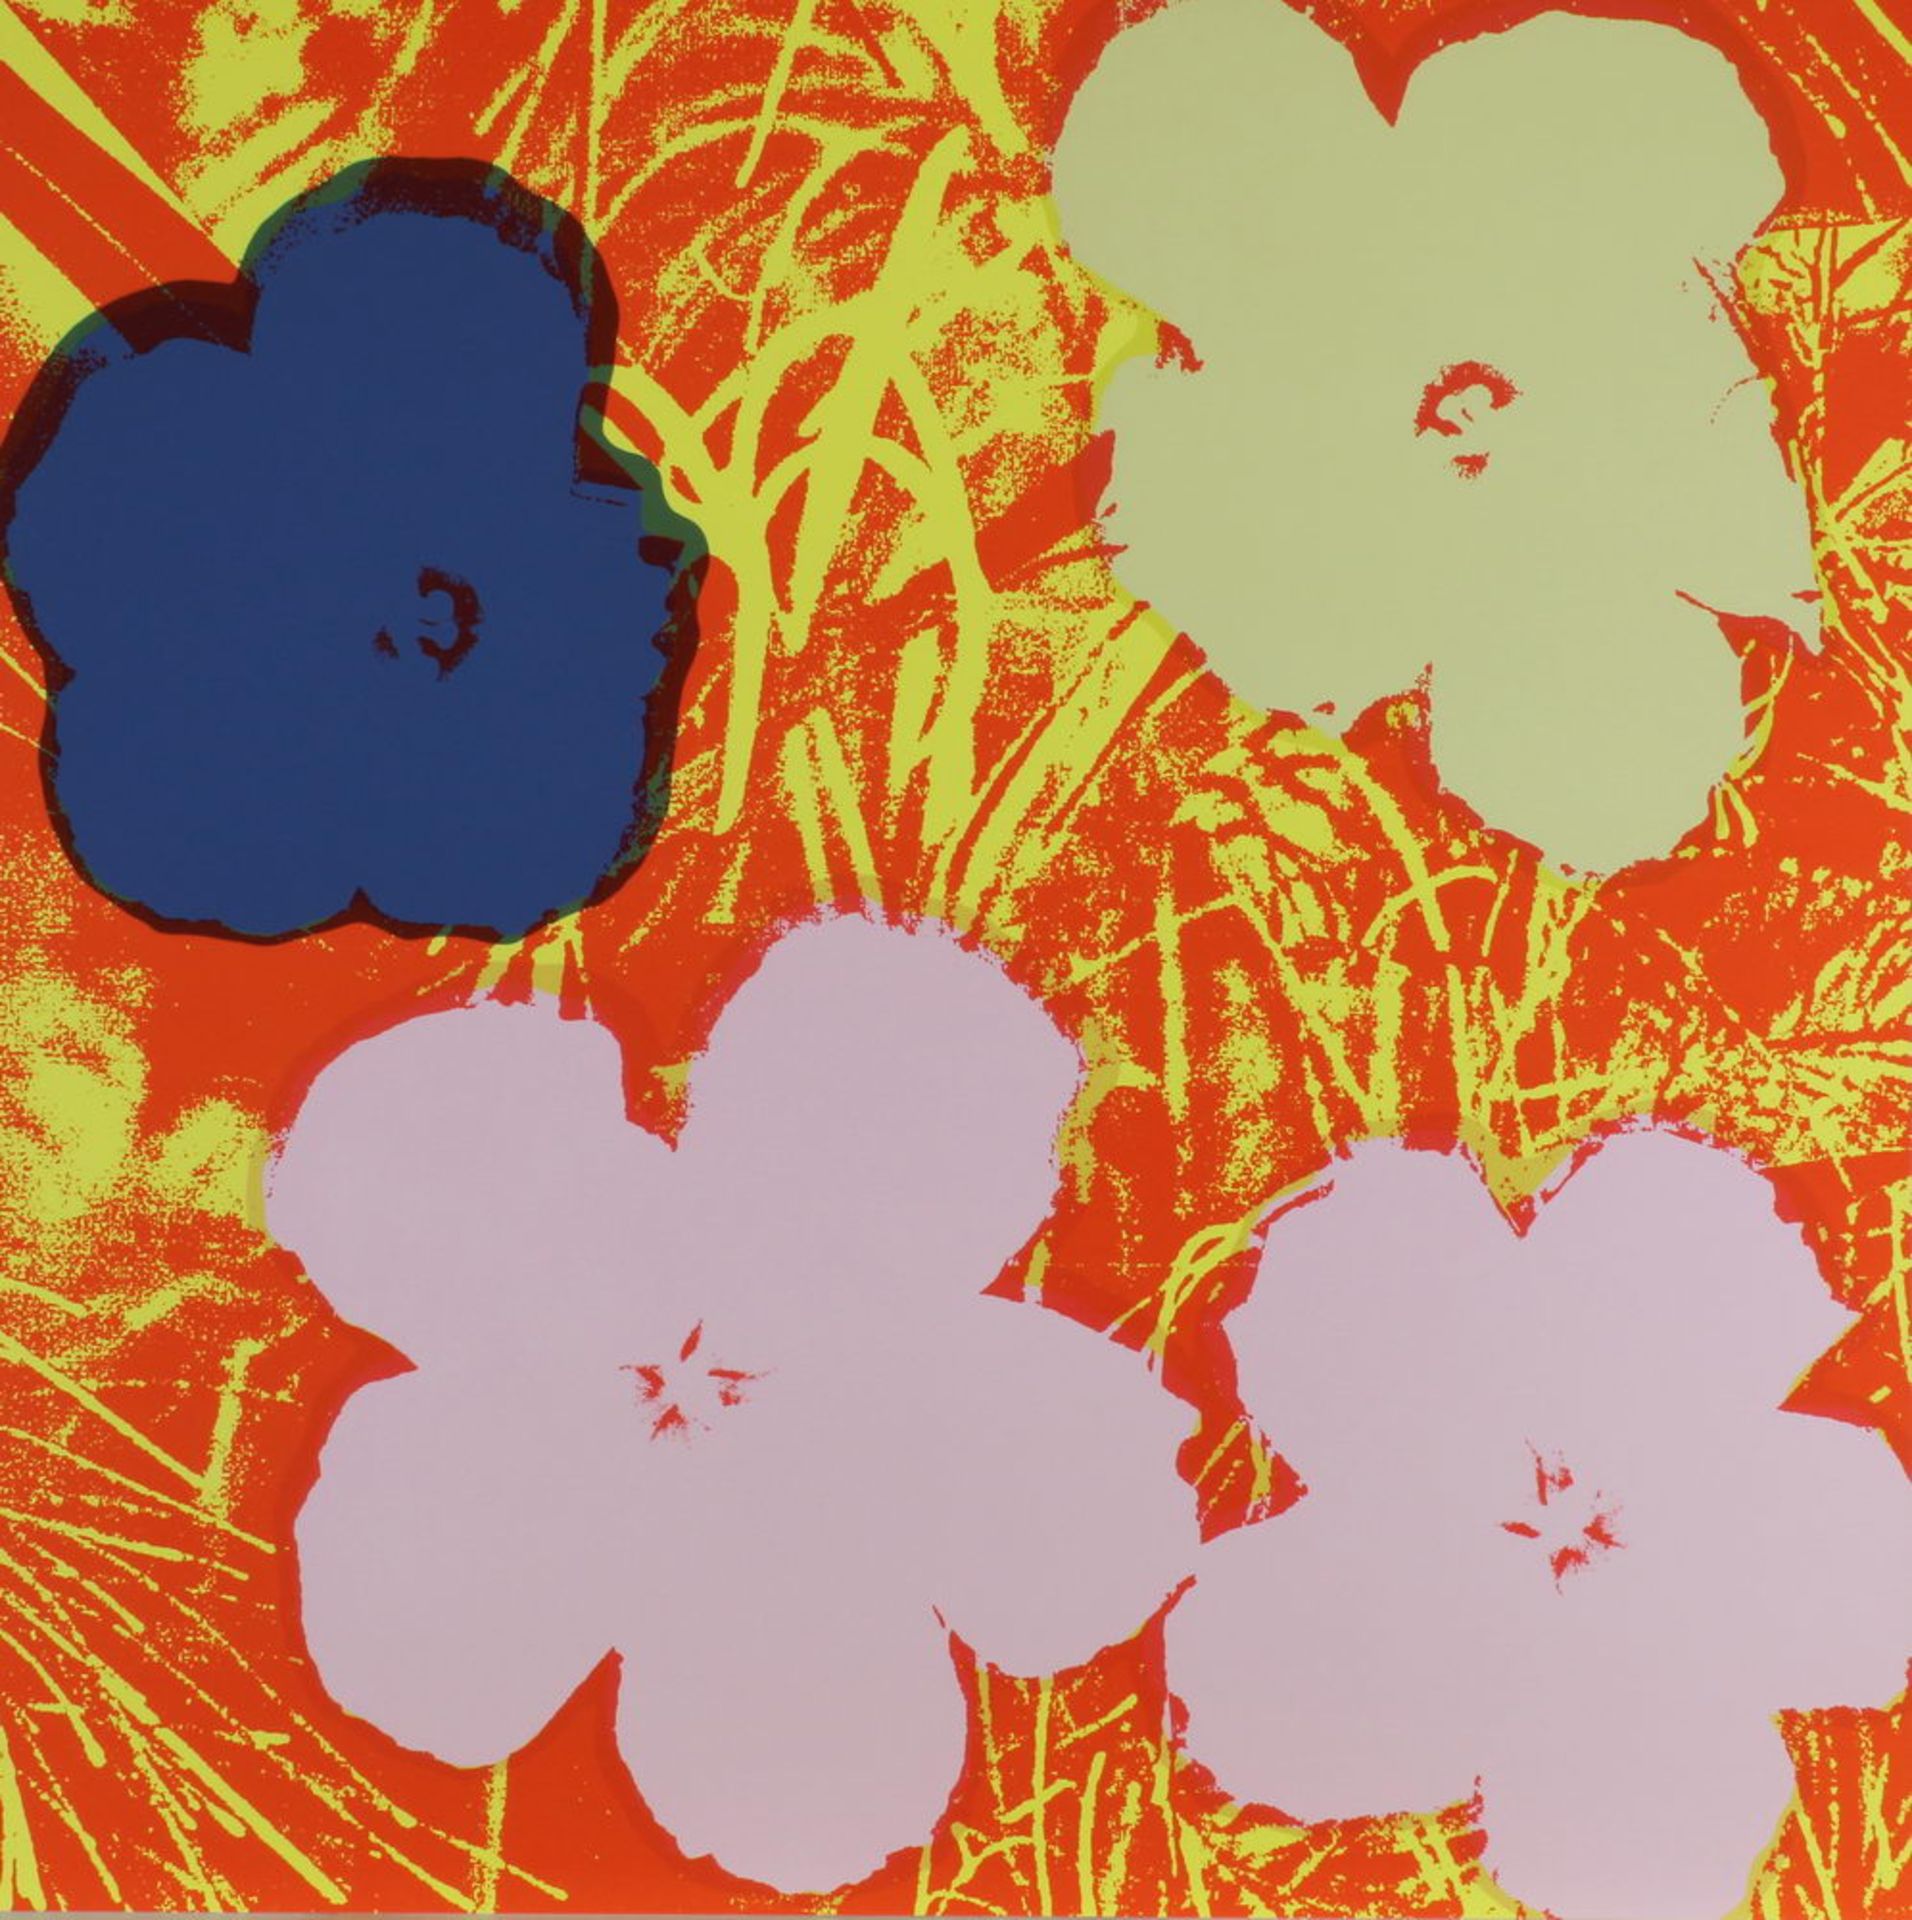 Warhol, Andy (1928 Pittsburgh - 1987 New York), 10 Farbserigrafien, "Flowers", published by Sunday - Image 8 of 10